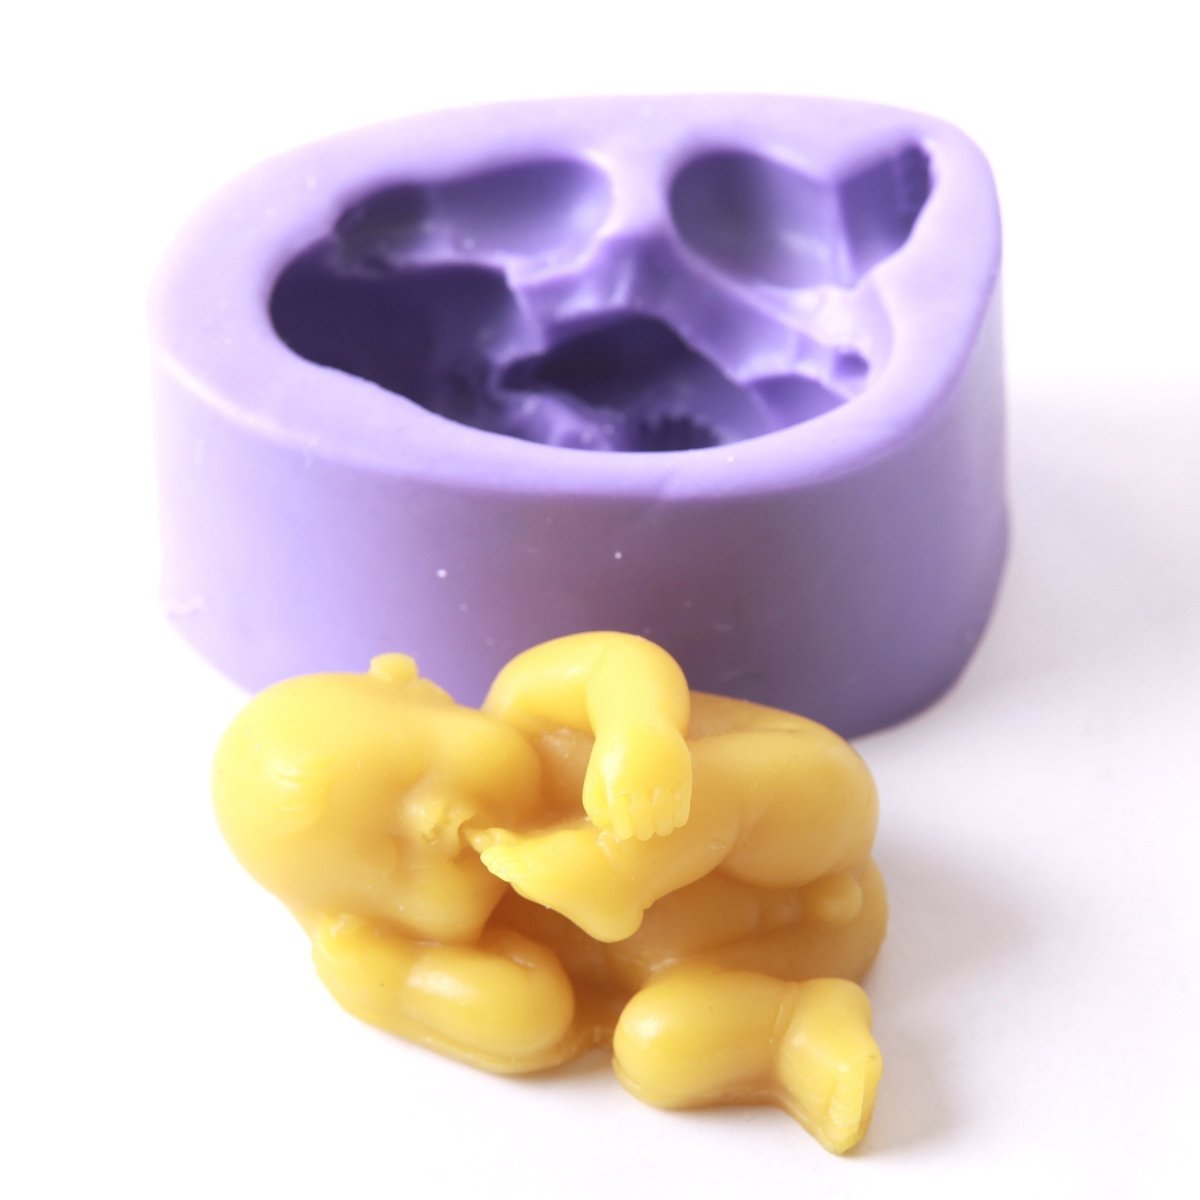 Newborn Baby On Side Silicone Soap Mould R0574 - Mystic Moments UK